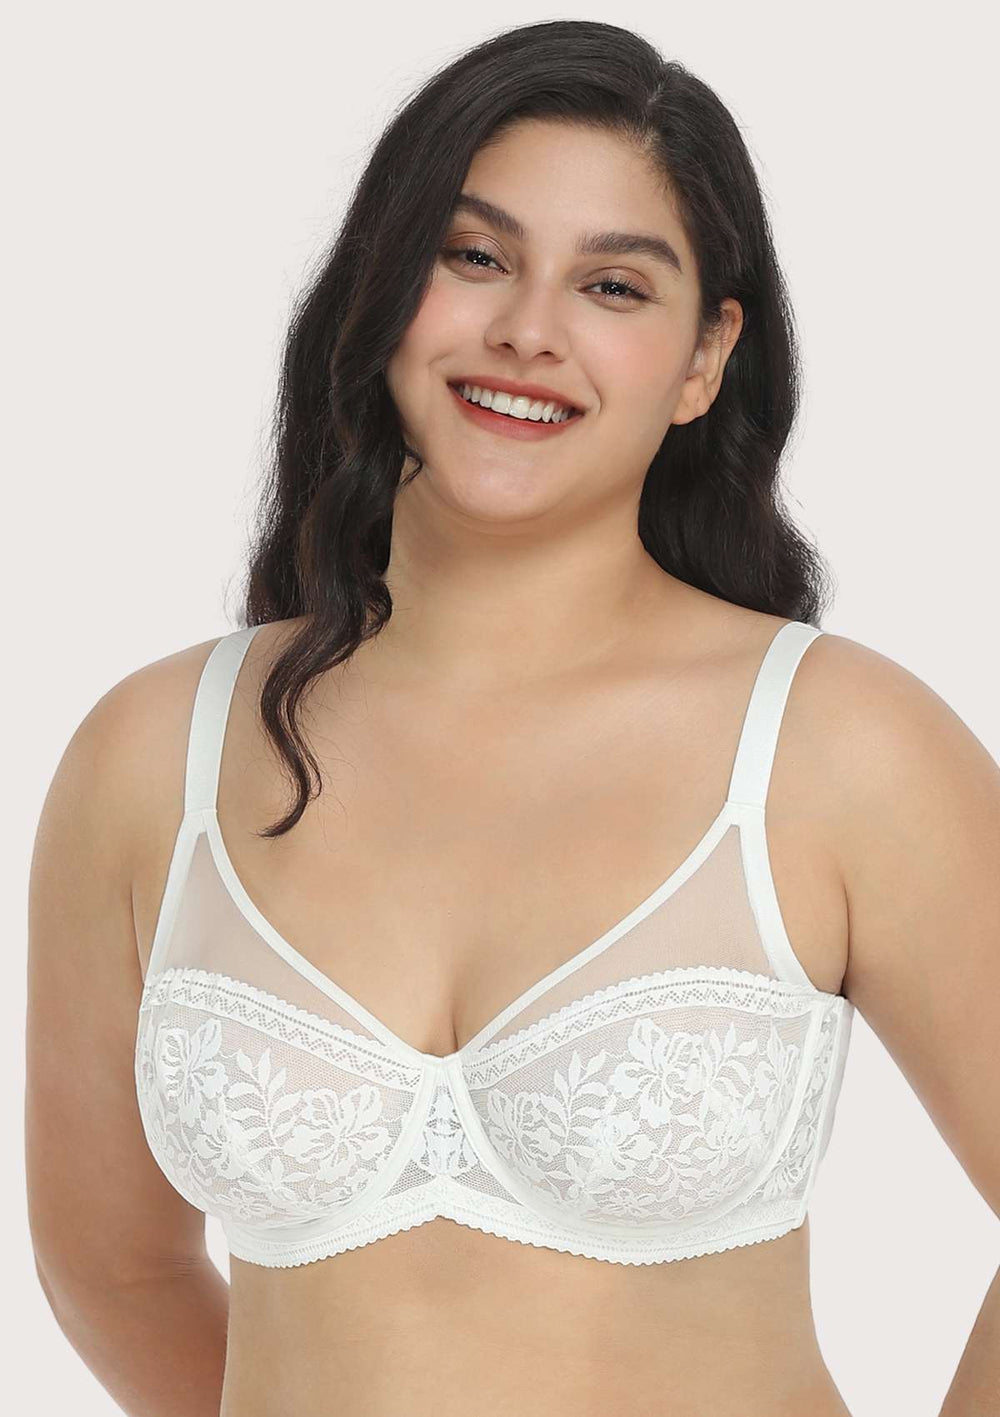 HSIA Lace Minimizer Bras for Women Full Coverage Unlined Underwire